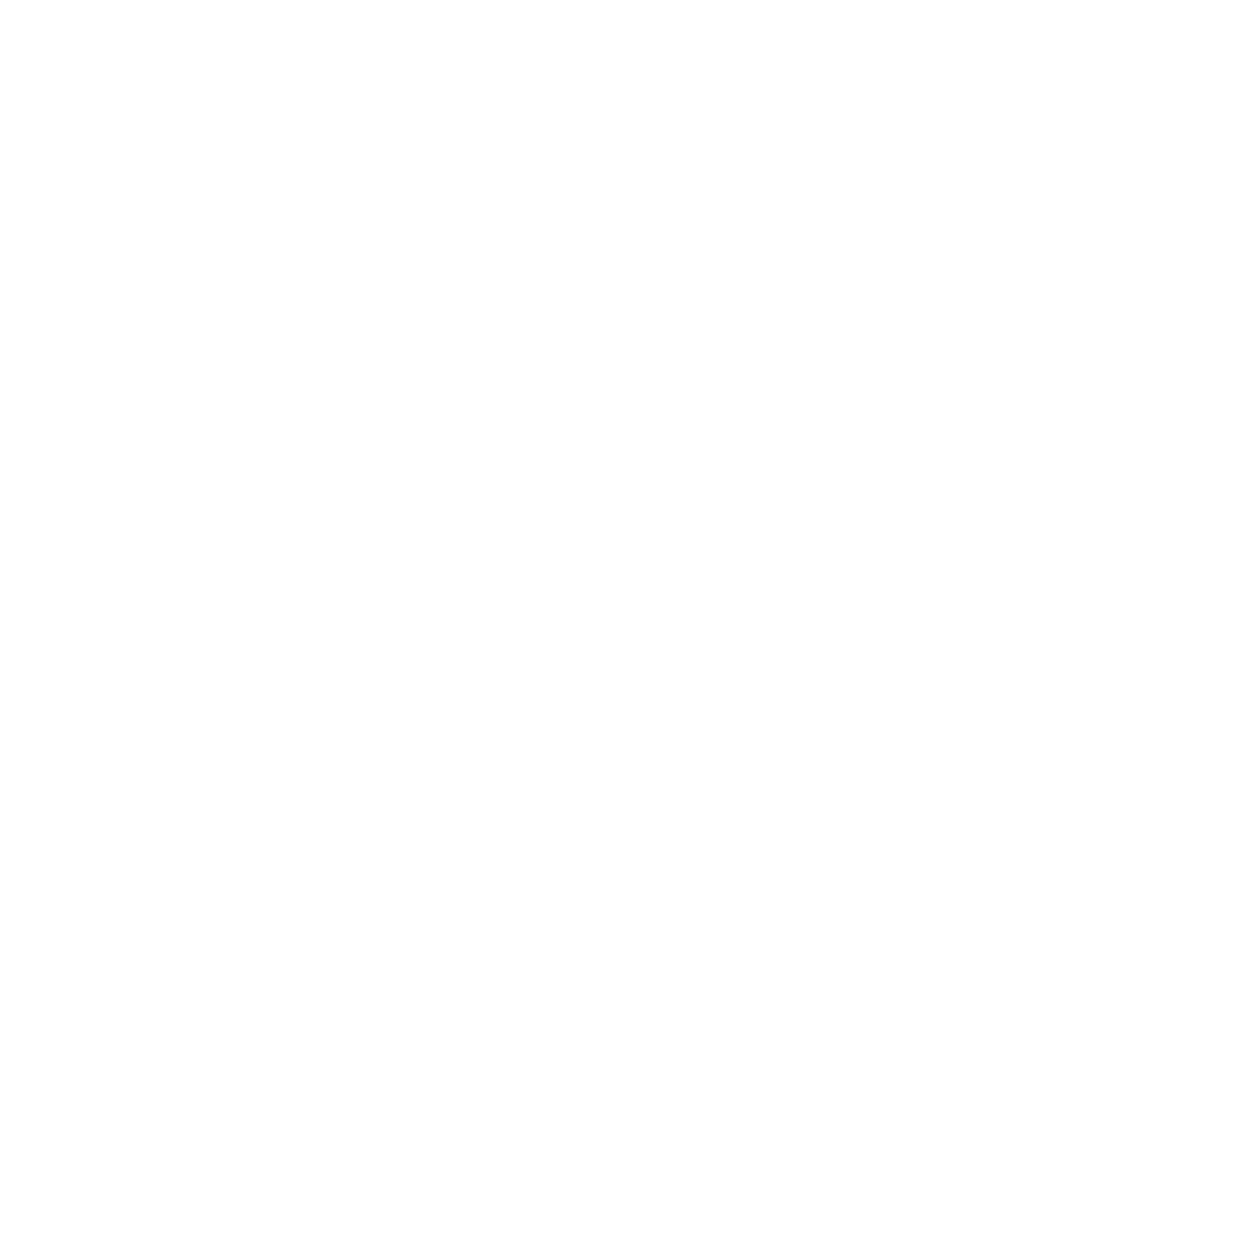 Case In Point Communications